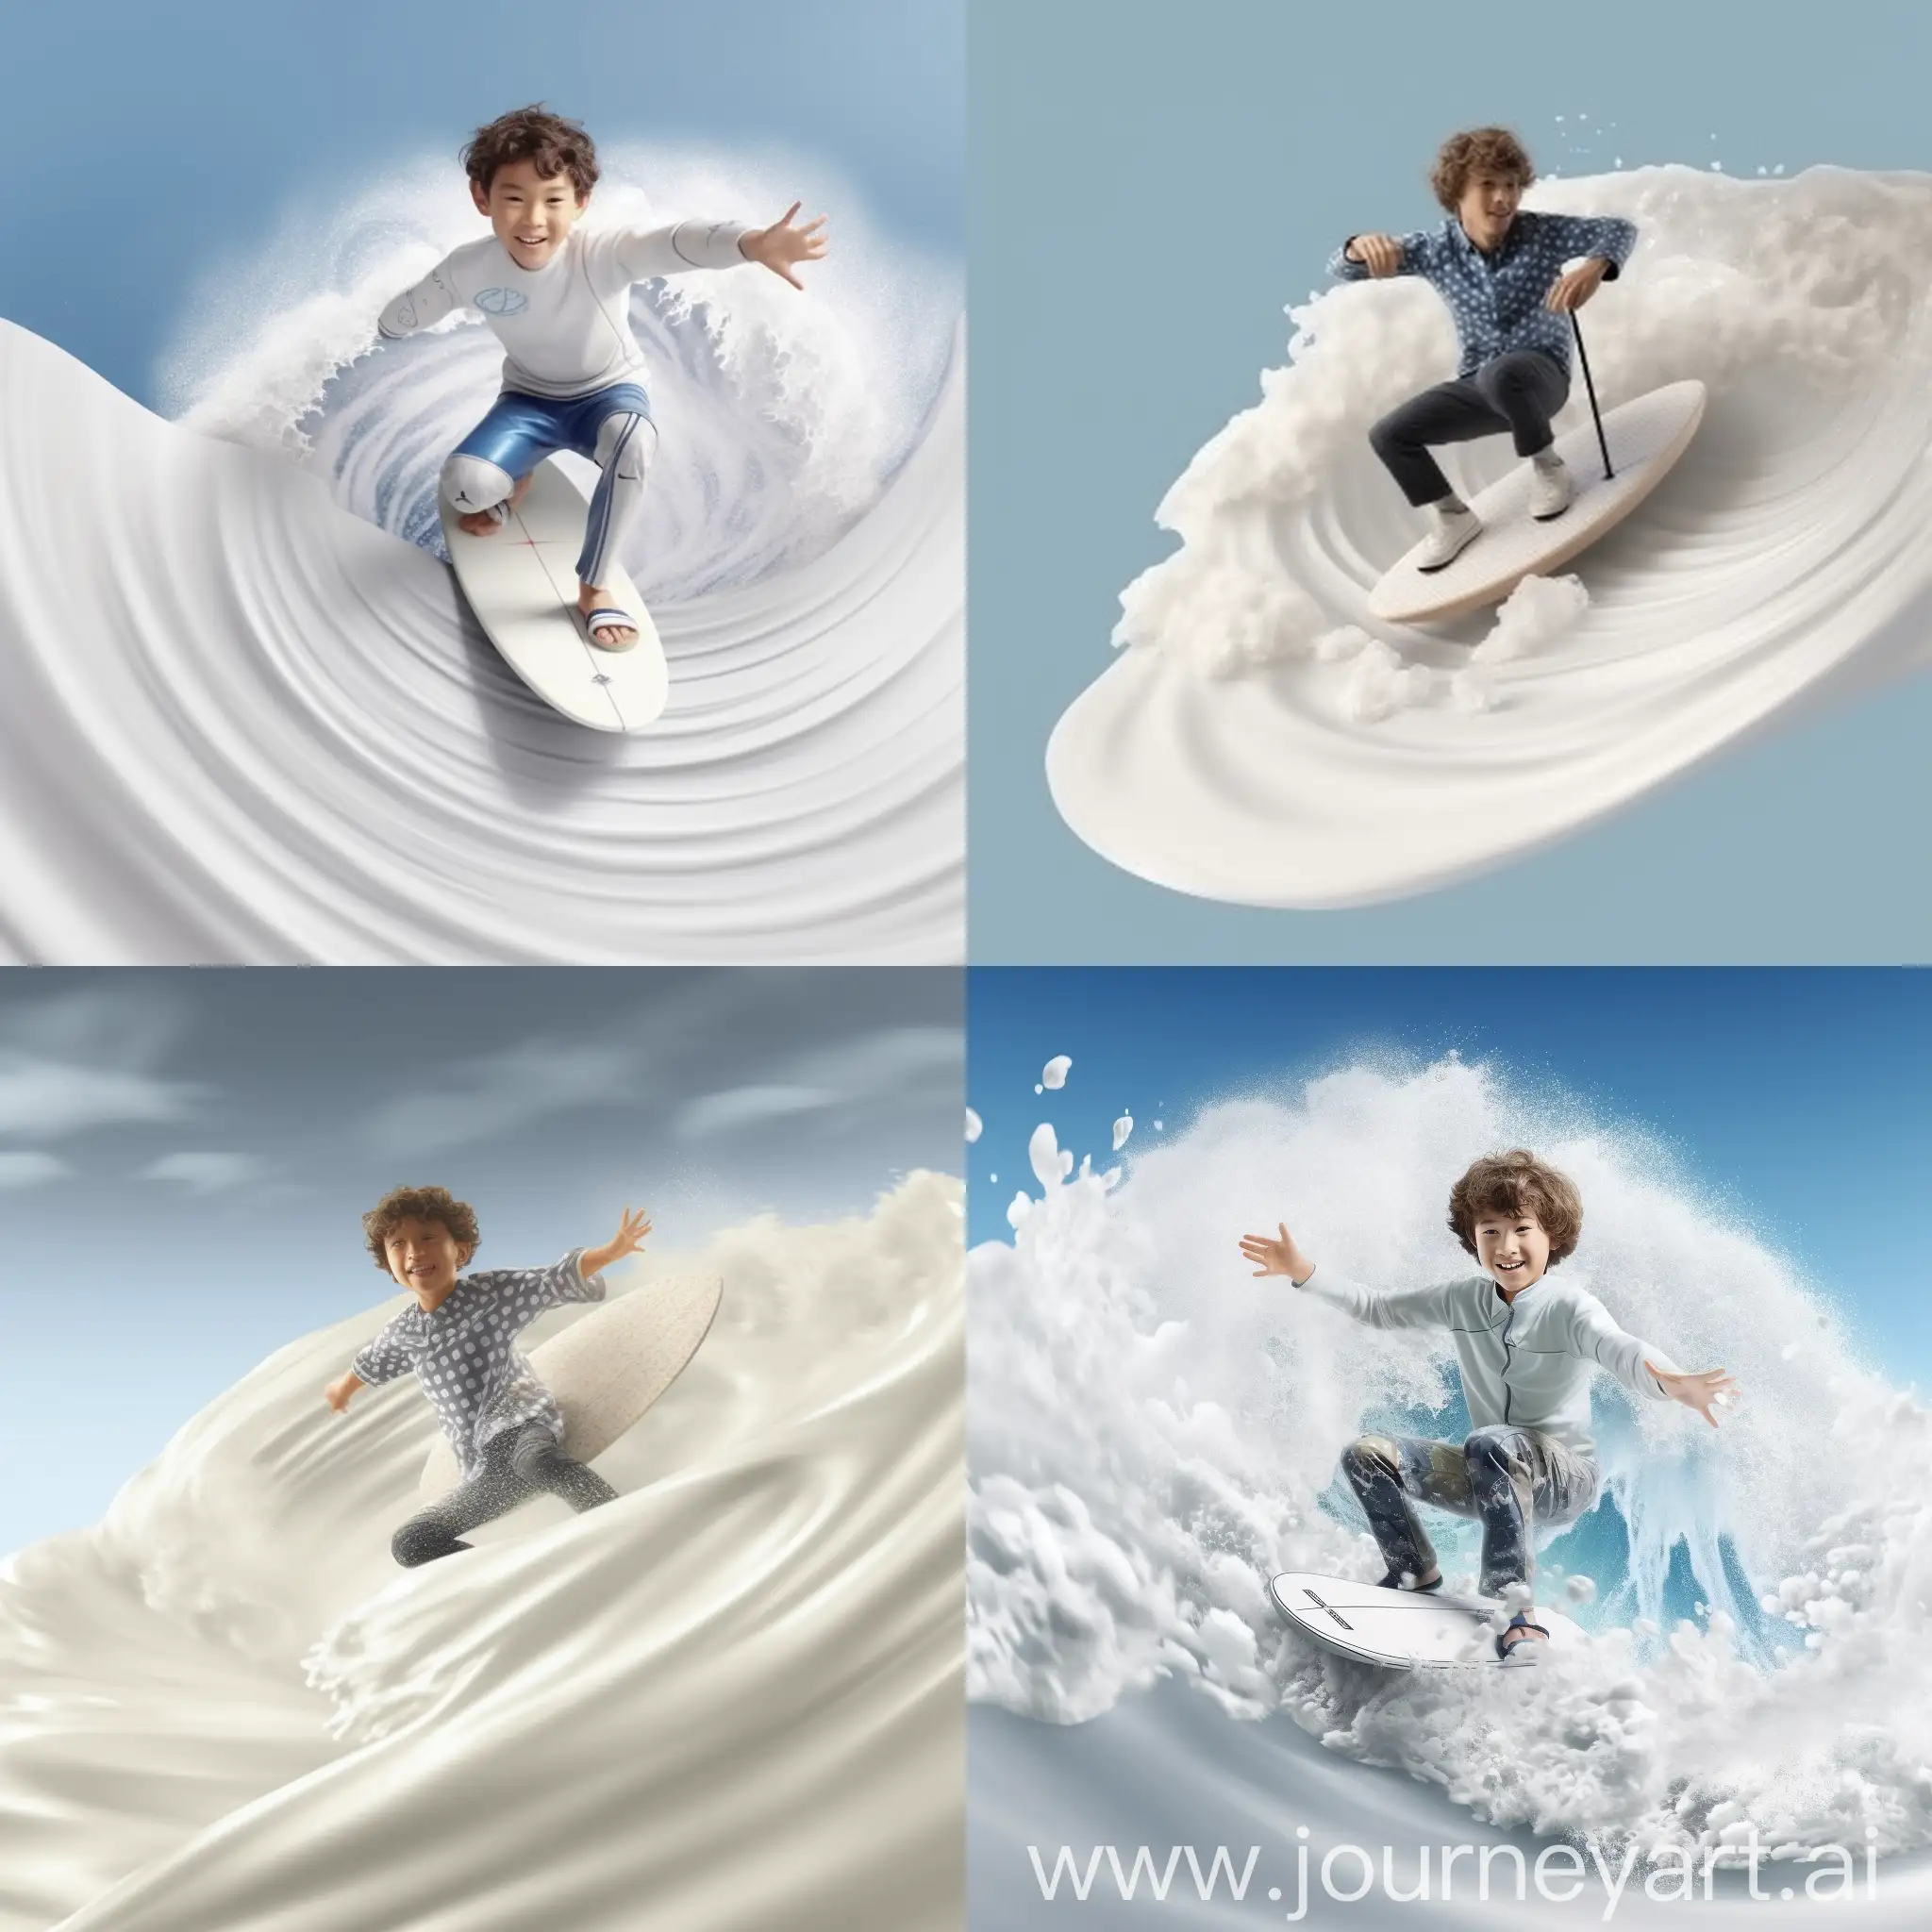 Man made of milk, boy, Chinese, surfing, boyish feeling, milk texture, 3 3D rendering, ultra-clear picture, 8K --s 750 --v 5.1 --iw 2.0